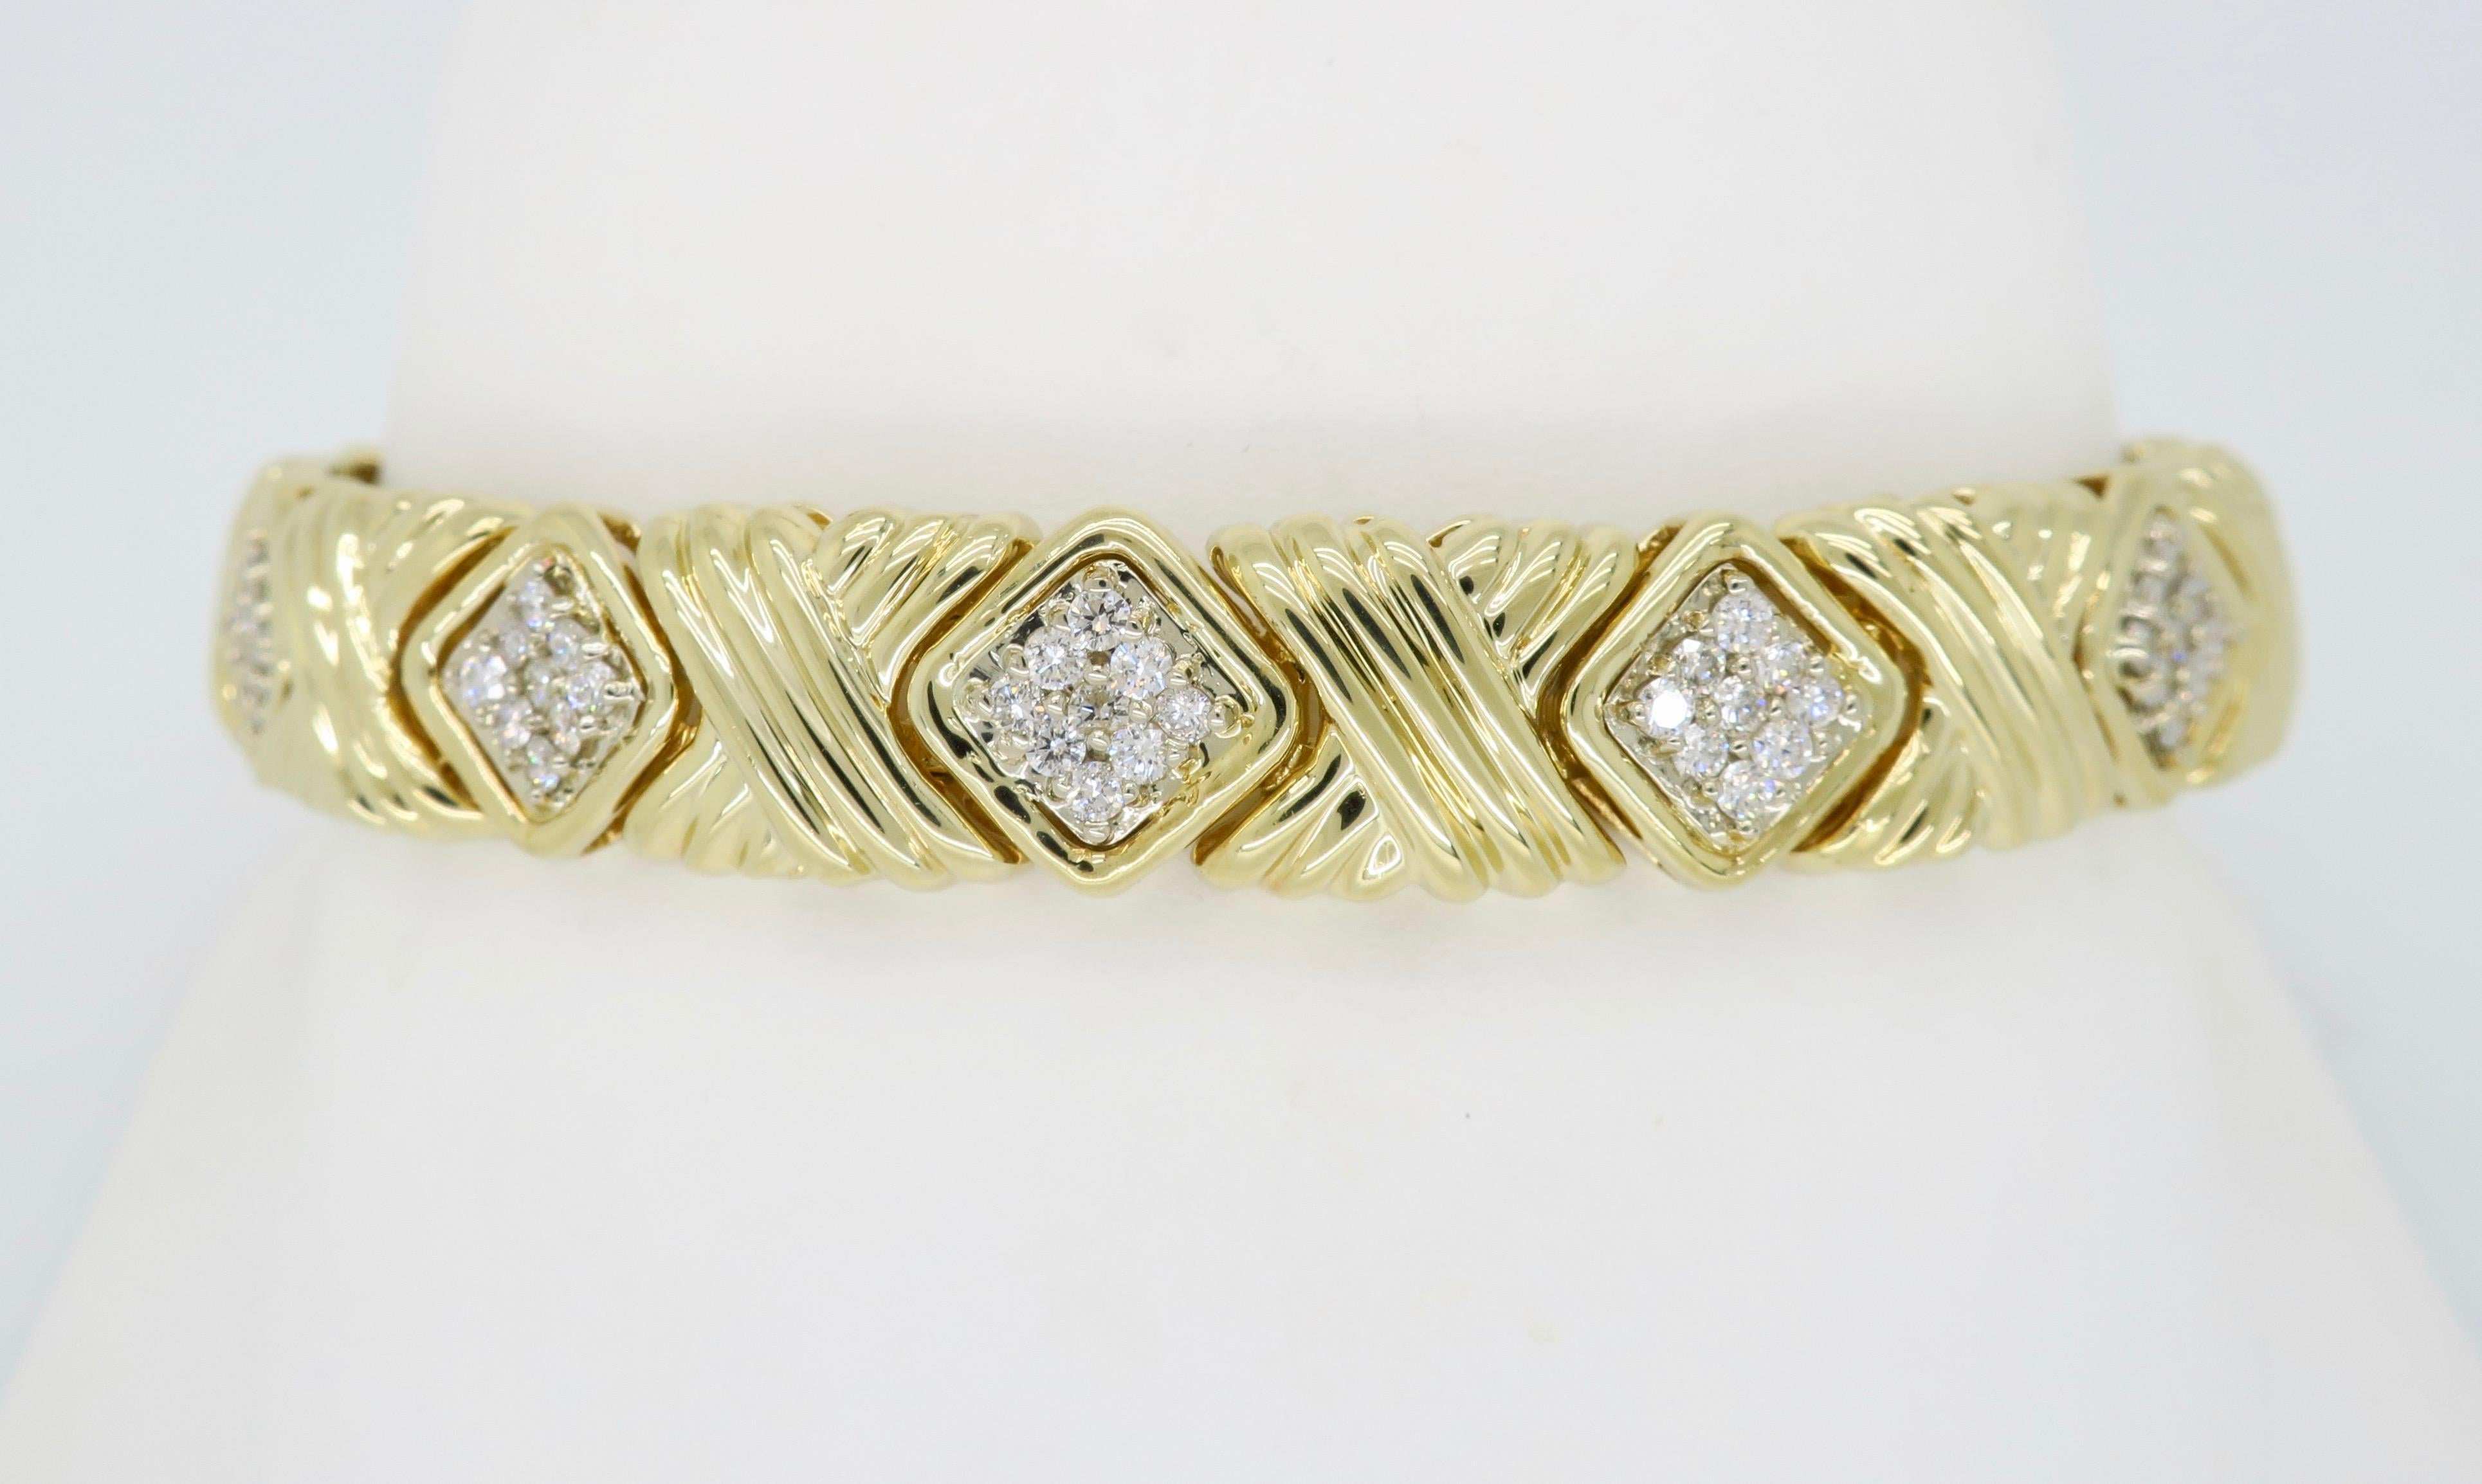 Unique “X” style diamond link bracelet crafted in 14k yellow gold.

Diamond Carat Weight: Approximately 1.05CTW
Diamond Cut: Round Brilliant Cut 
Color: Average G-J
Clarity: Average SI
Metal: 14K Yellow Gold
Marked/Tested: Stamped  “14K